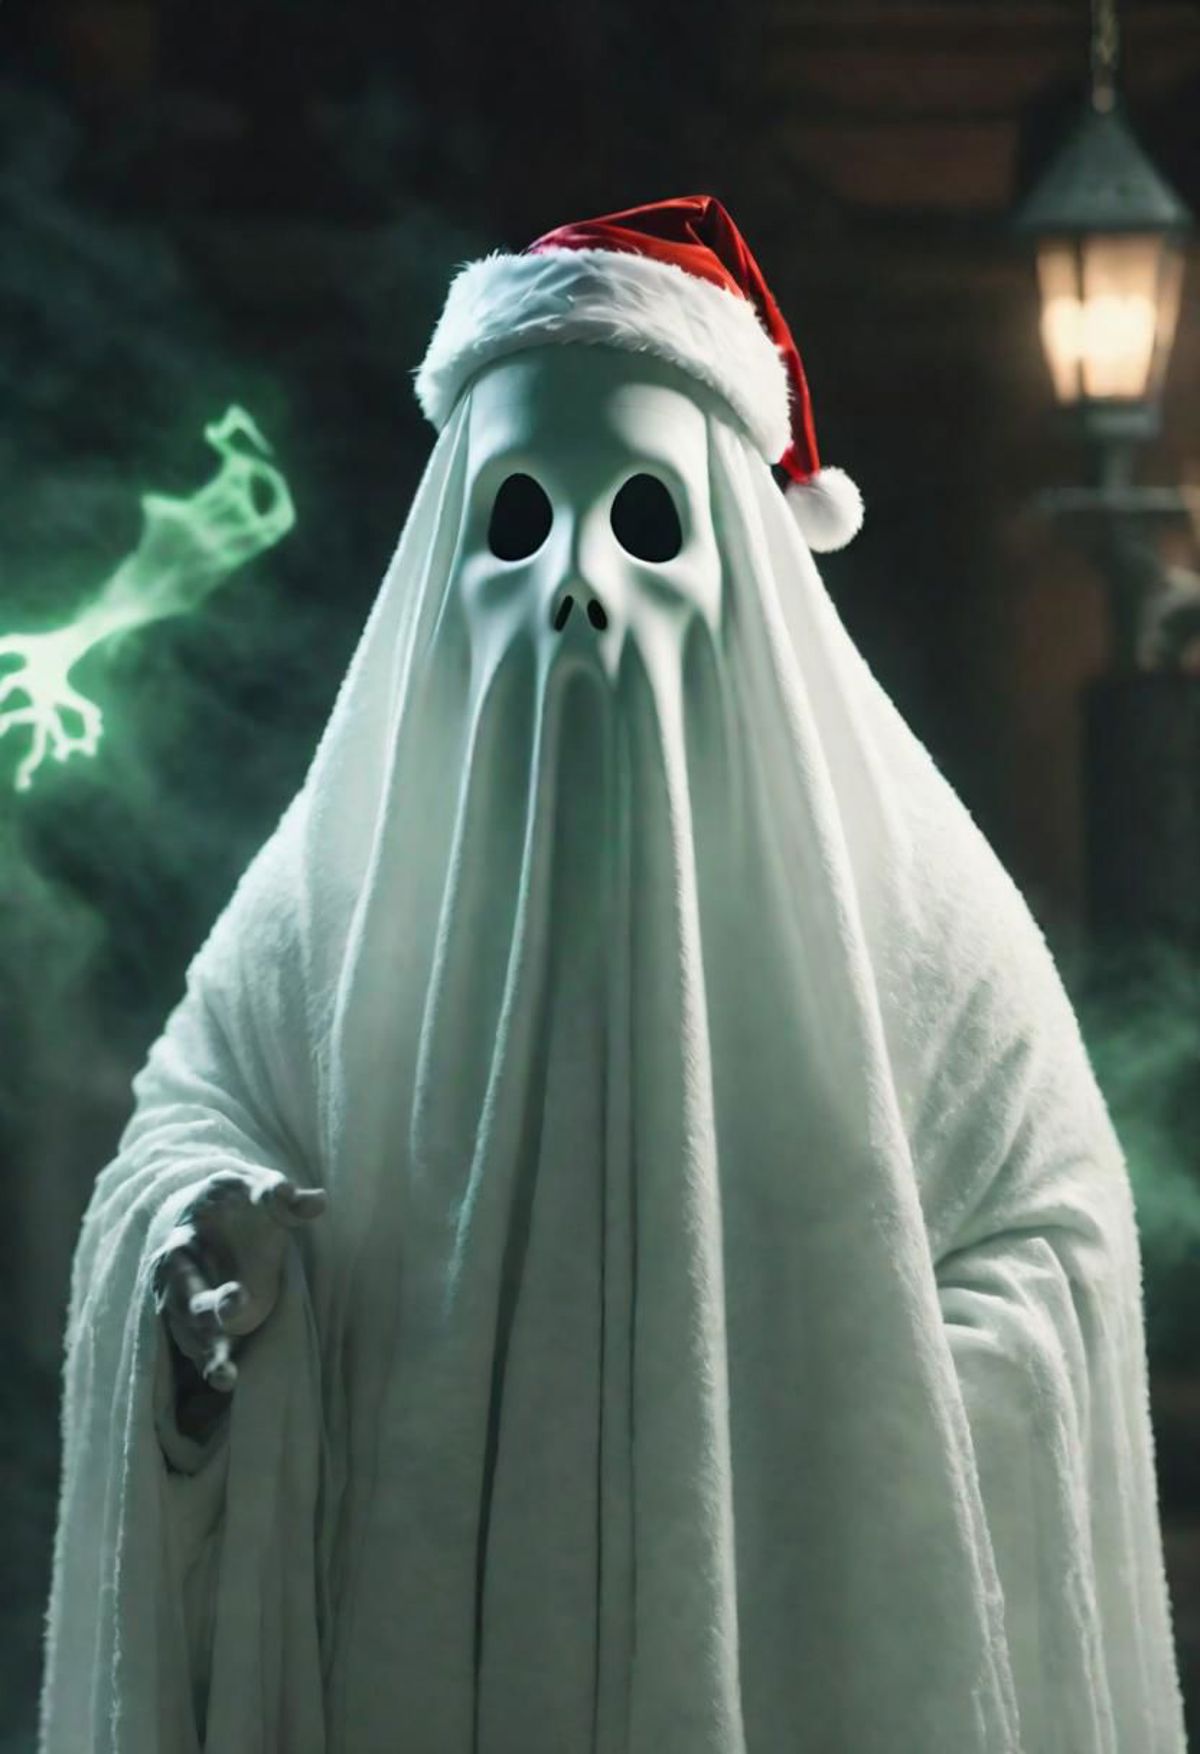 A computer-generated ghost wearing a Santa hat and holding a green lightning bolt.